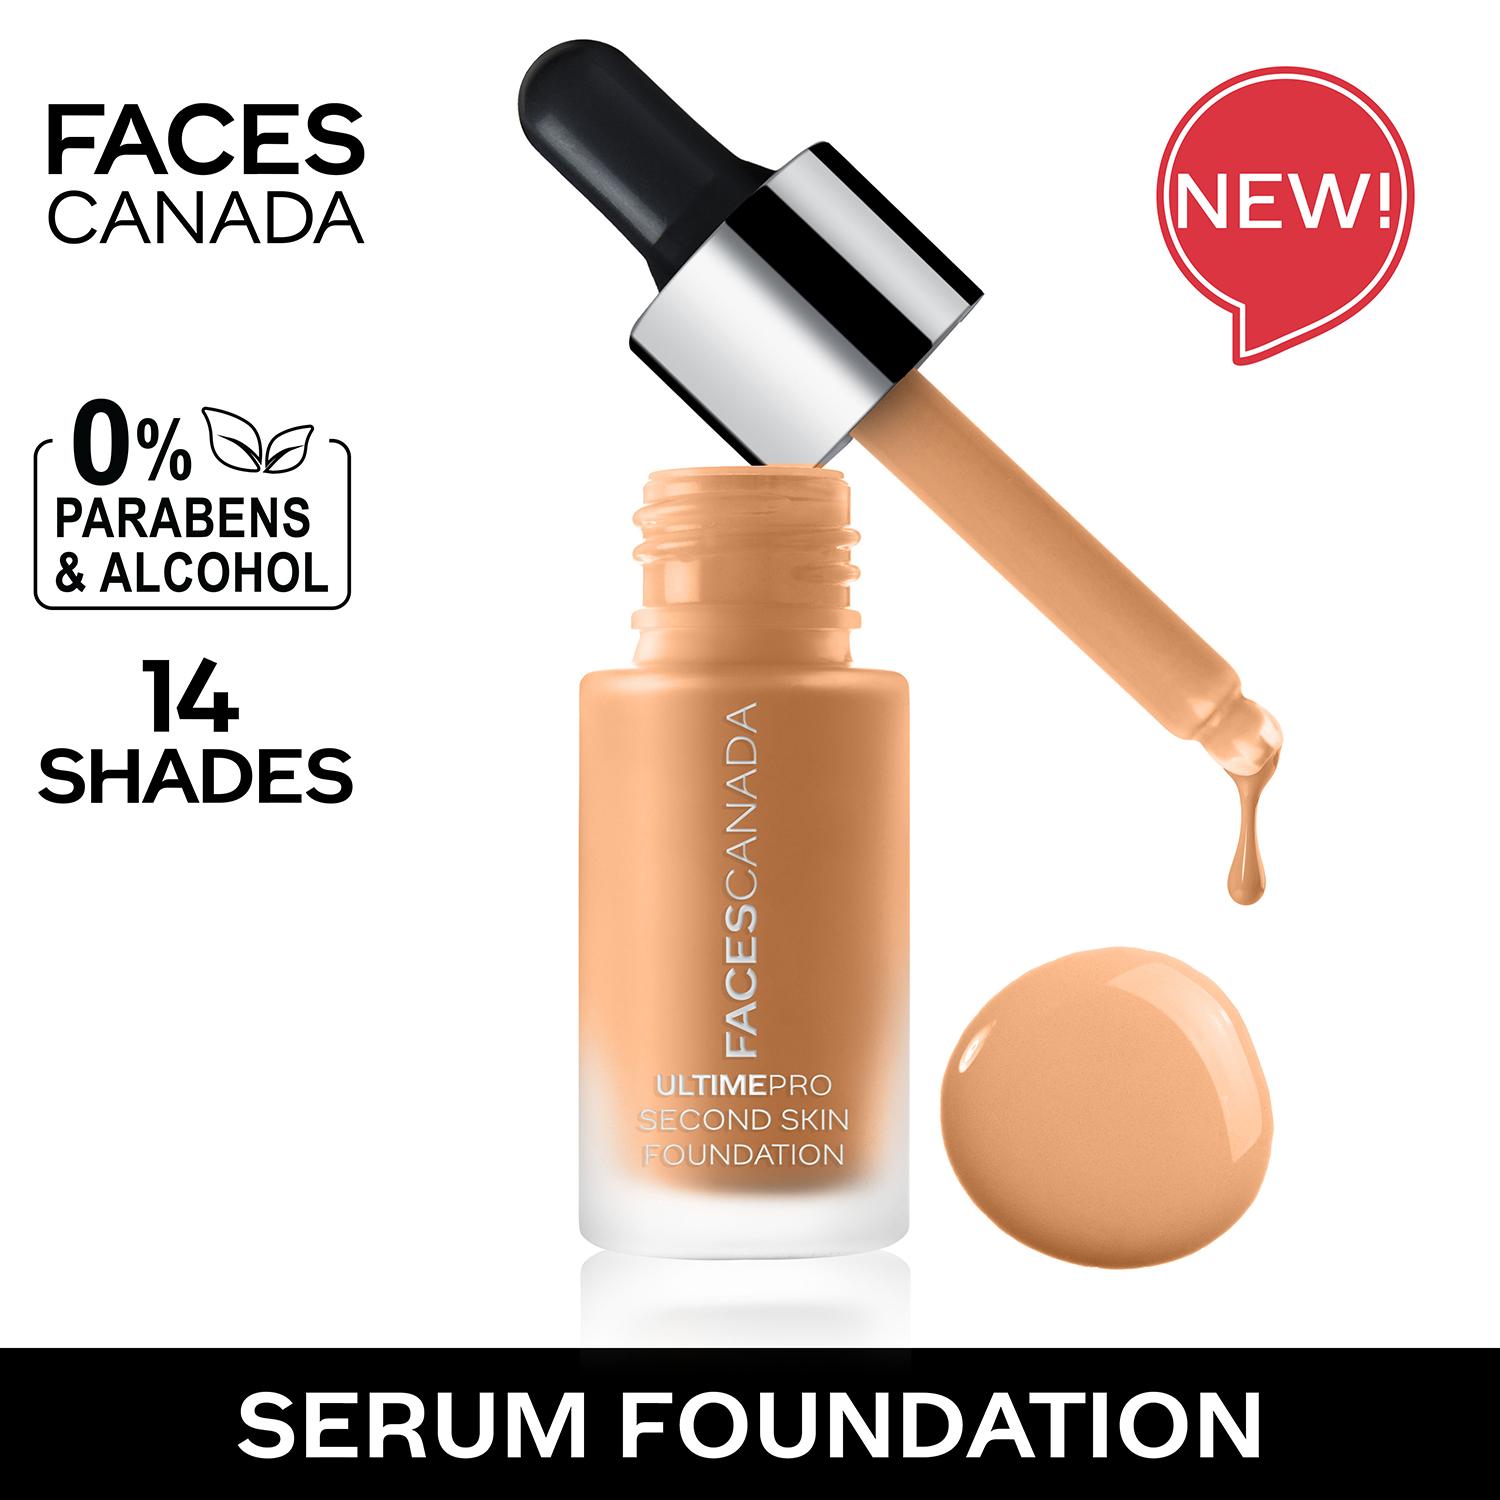 Faces Canada | Faces Canada Ultime Pro Second Skin Foundation - Ivory 01, Matte Finish, SPF 15 (15 ml)